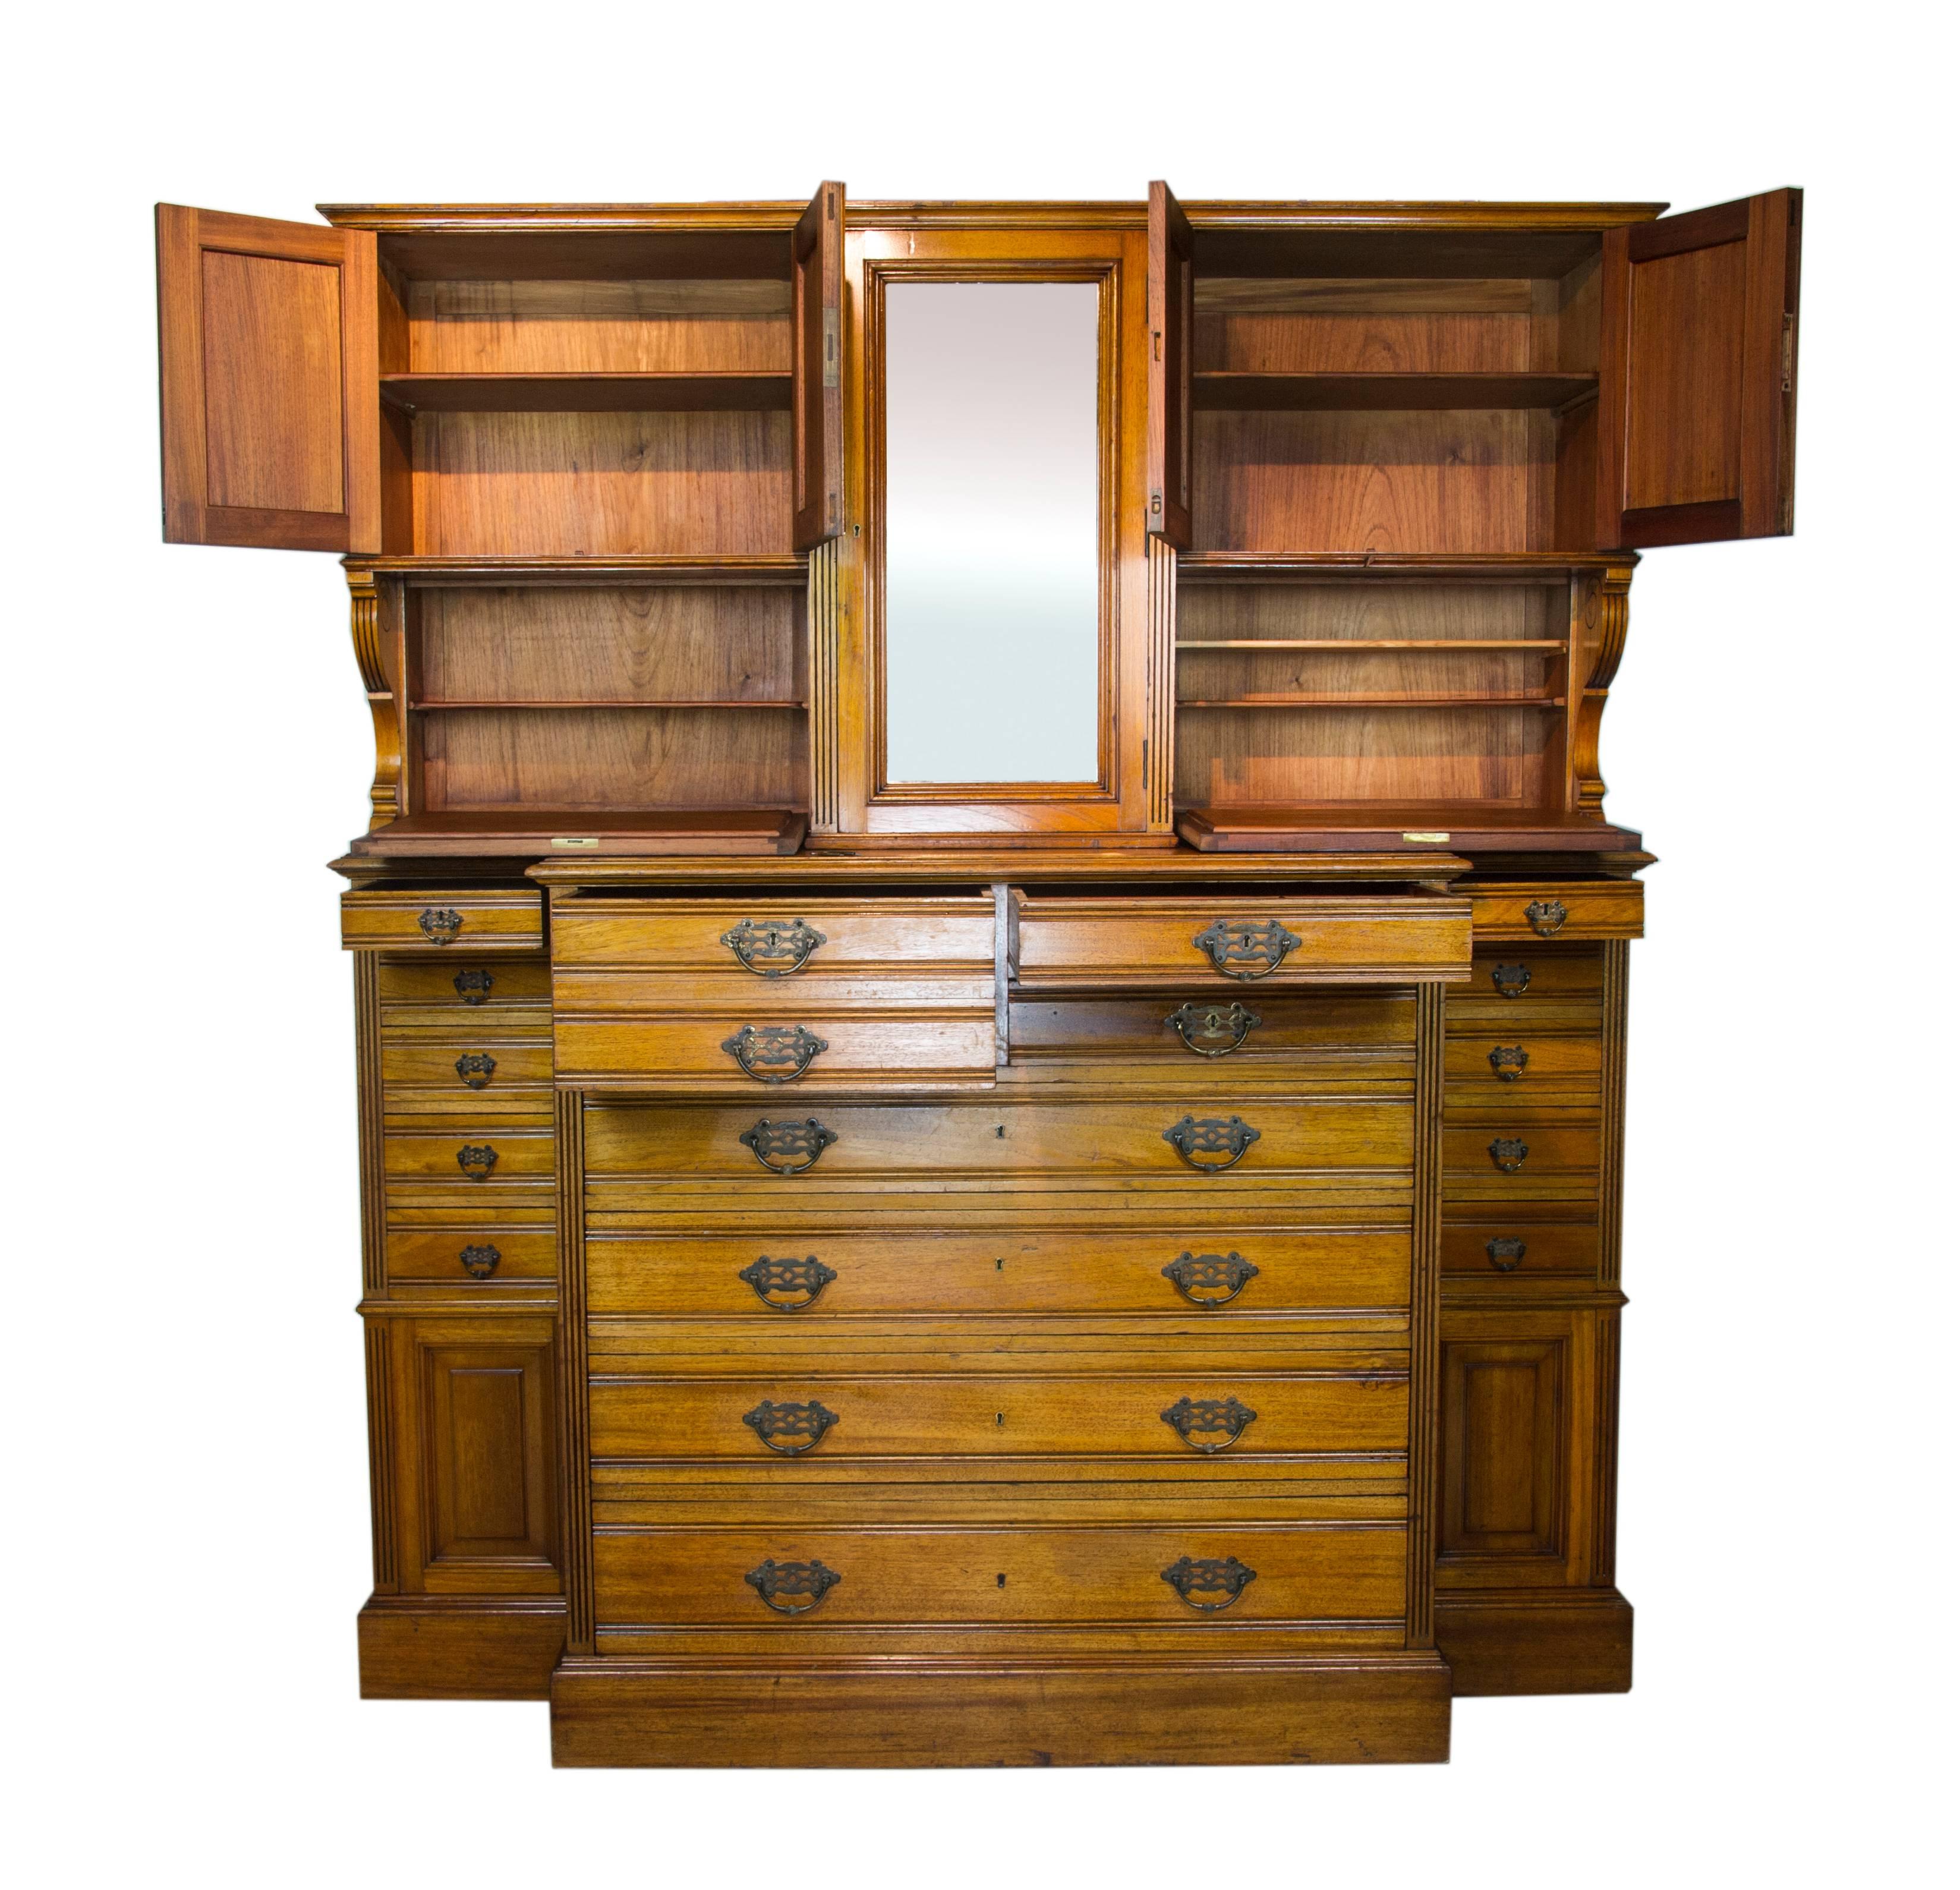 Antique apothecary cabinet, antique dentist cabinet, solid walnut, antique furniture, B1061

Scotland, 1870
Solid walnut construction
Original finish
Crisp moulded cornice above
Central beveled mirror door with interior shelving
Flanked by four